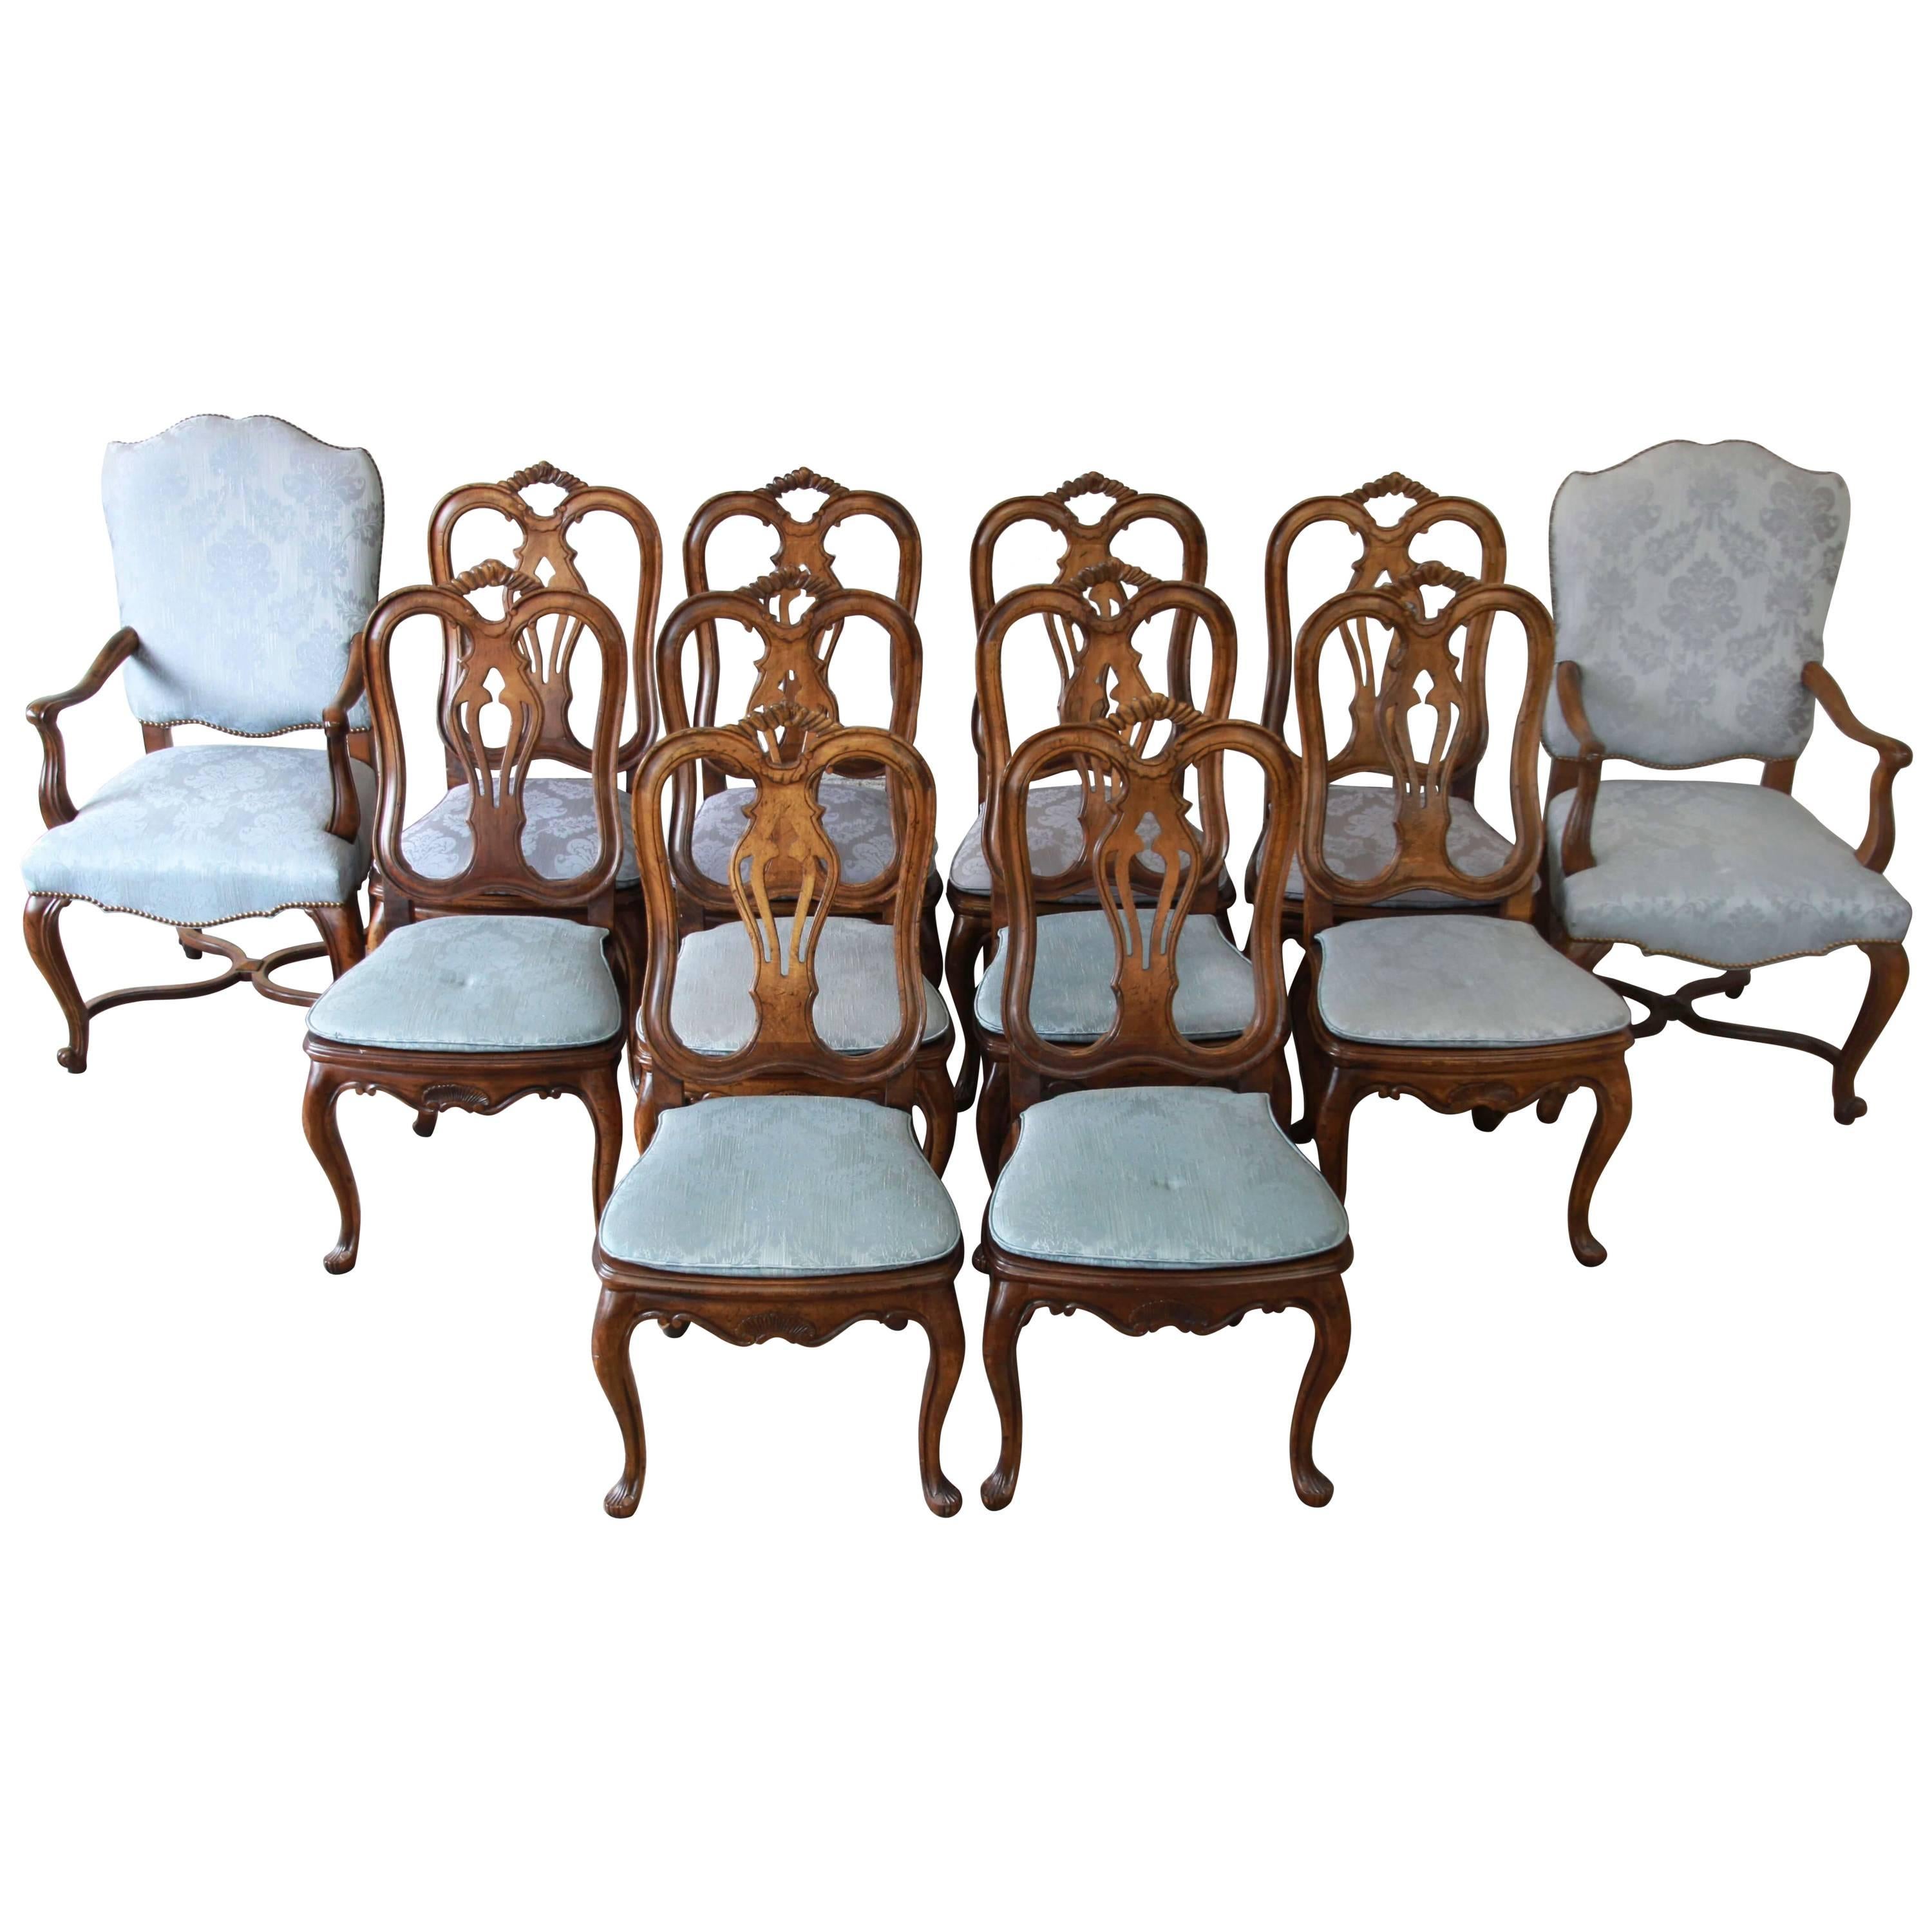 Set of 12 French Provincial Dining Chairs by Baker Furniture